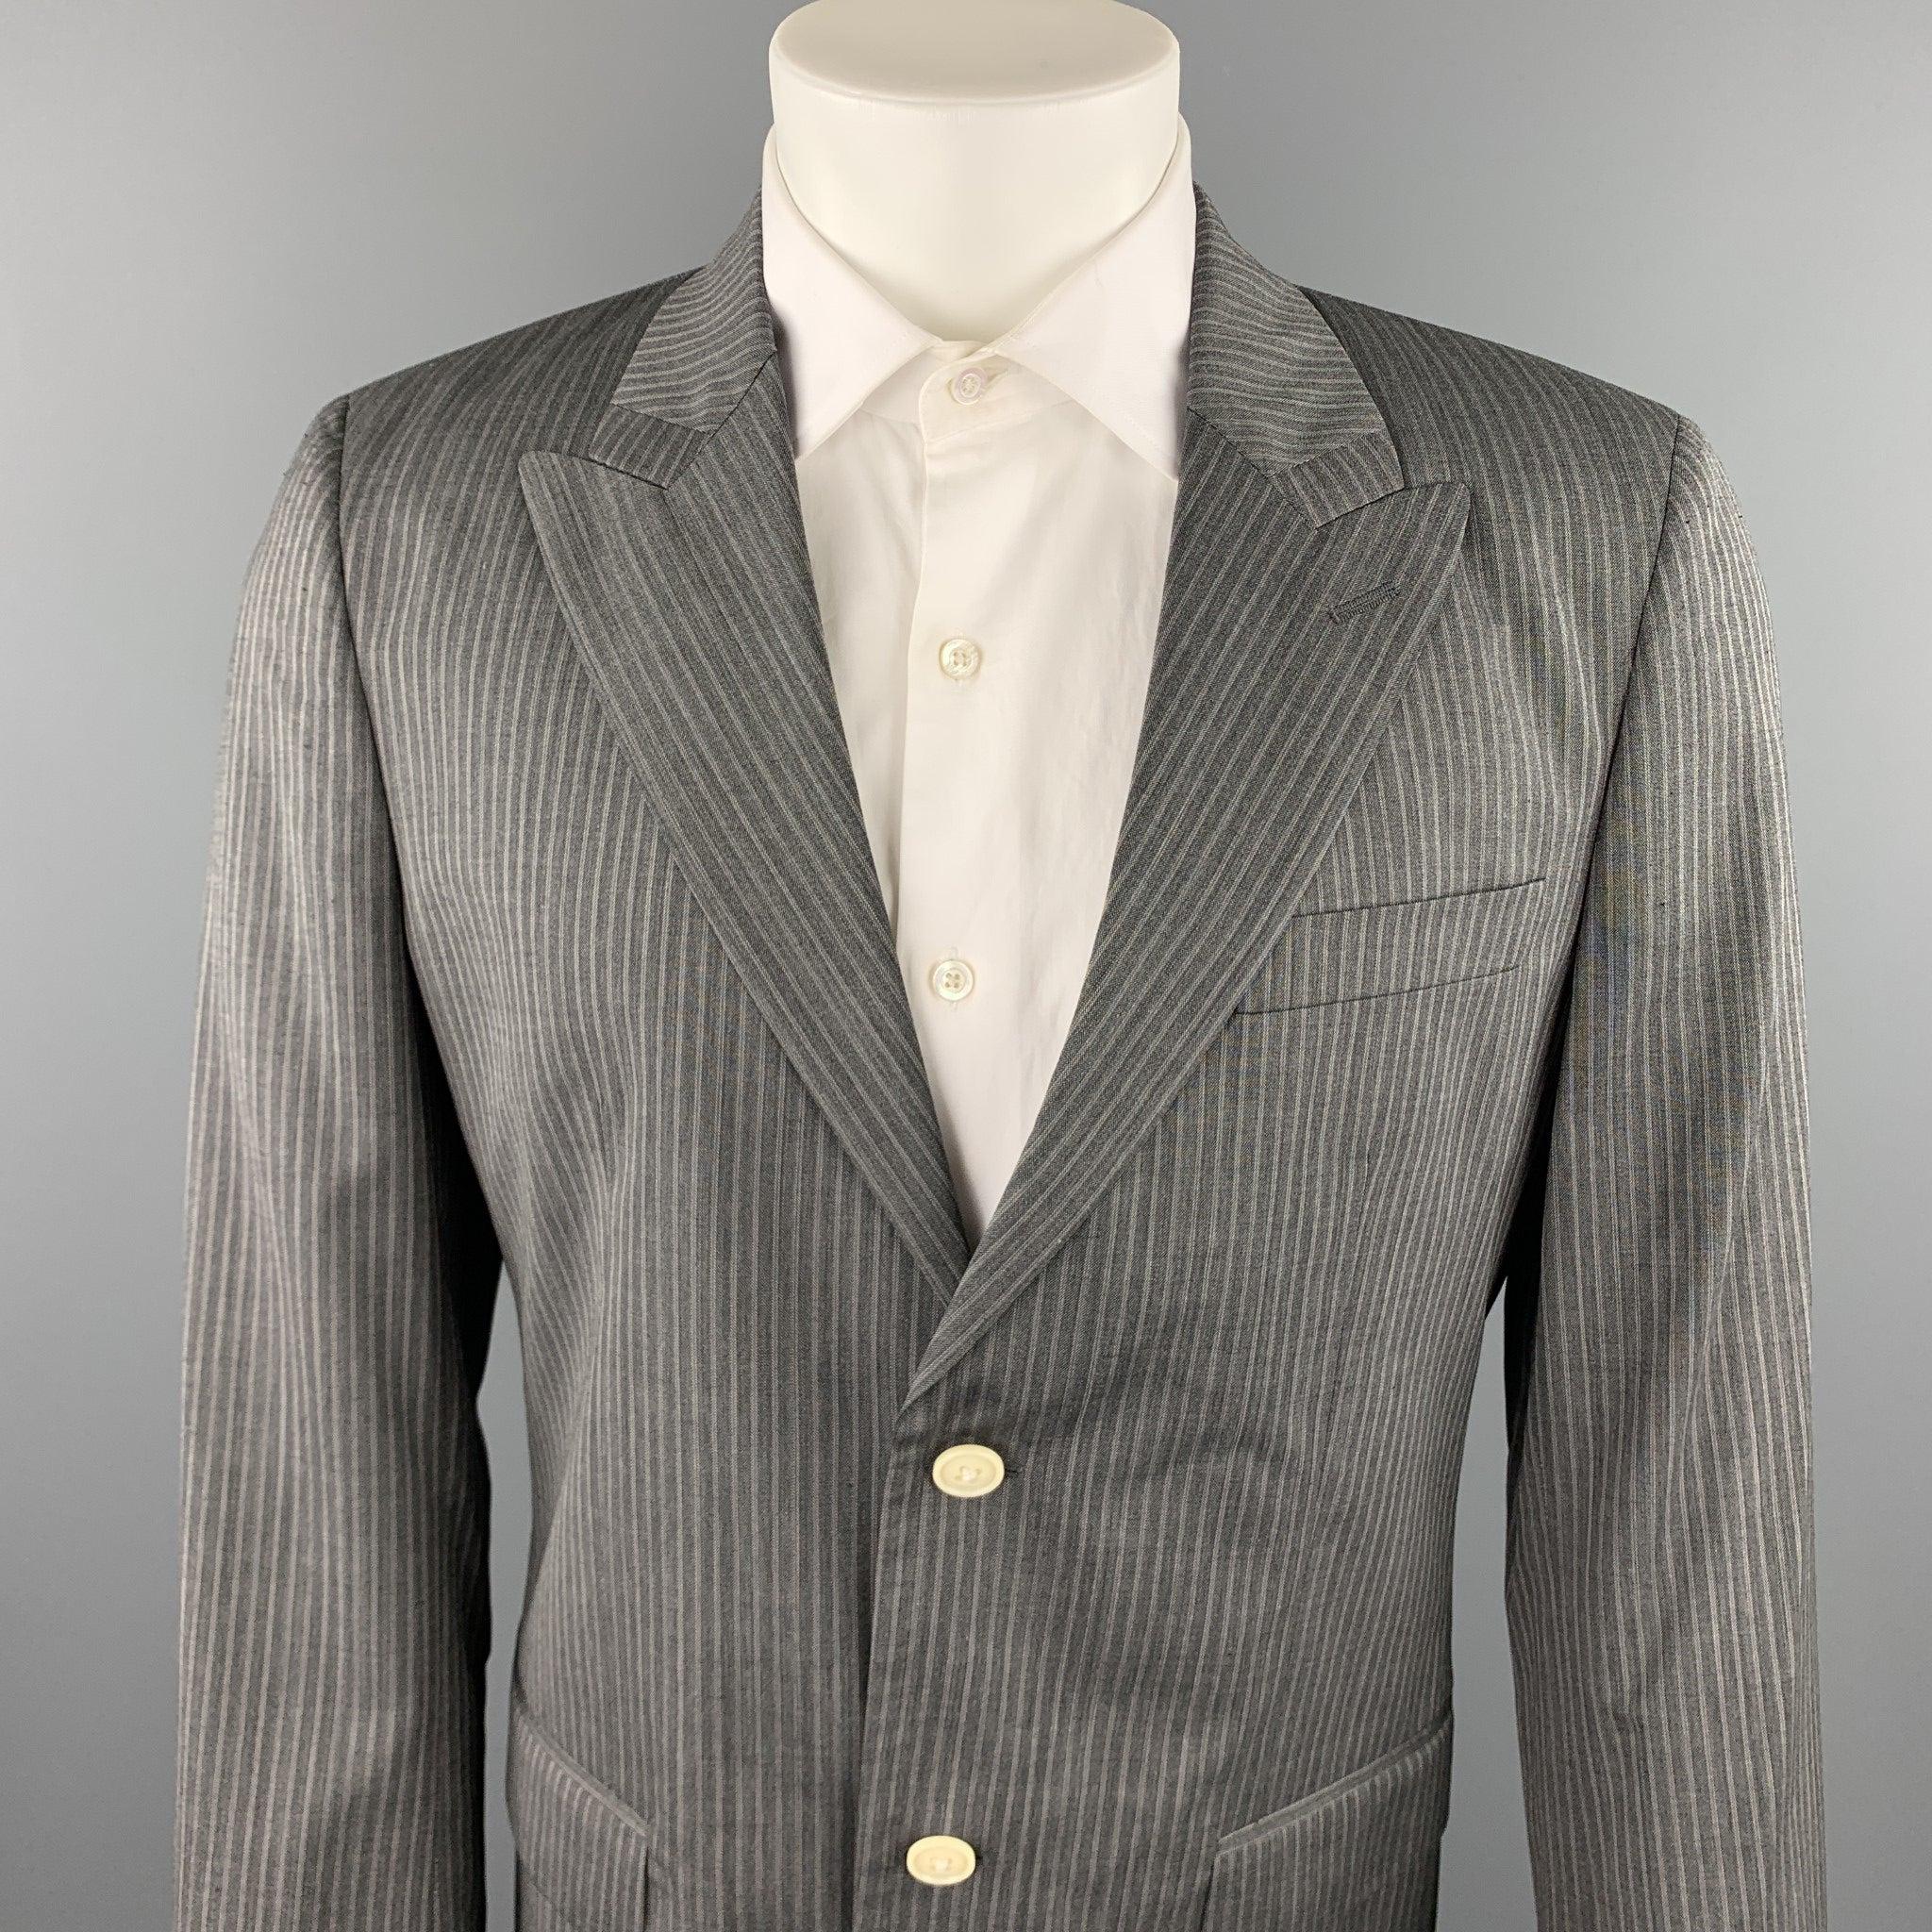 MARC JACOBS sport coat comes in a gray stripe wool with a full white liner featuring a peak lapel, flap pockets, and a two button closure. Made in Italy.New With Tags. 

Marked:   IT 50 

Measurements: 
 
Shoulder: 17.5 inches 
Chest: 40 inches